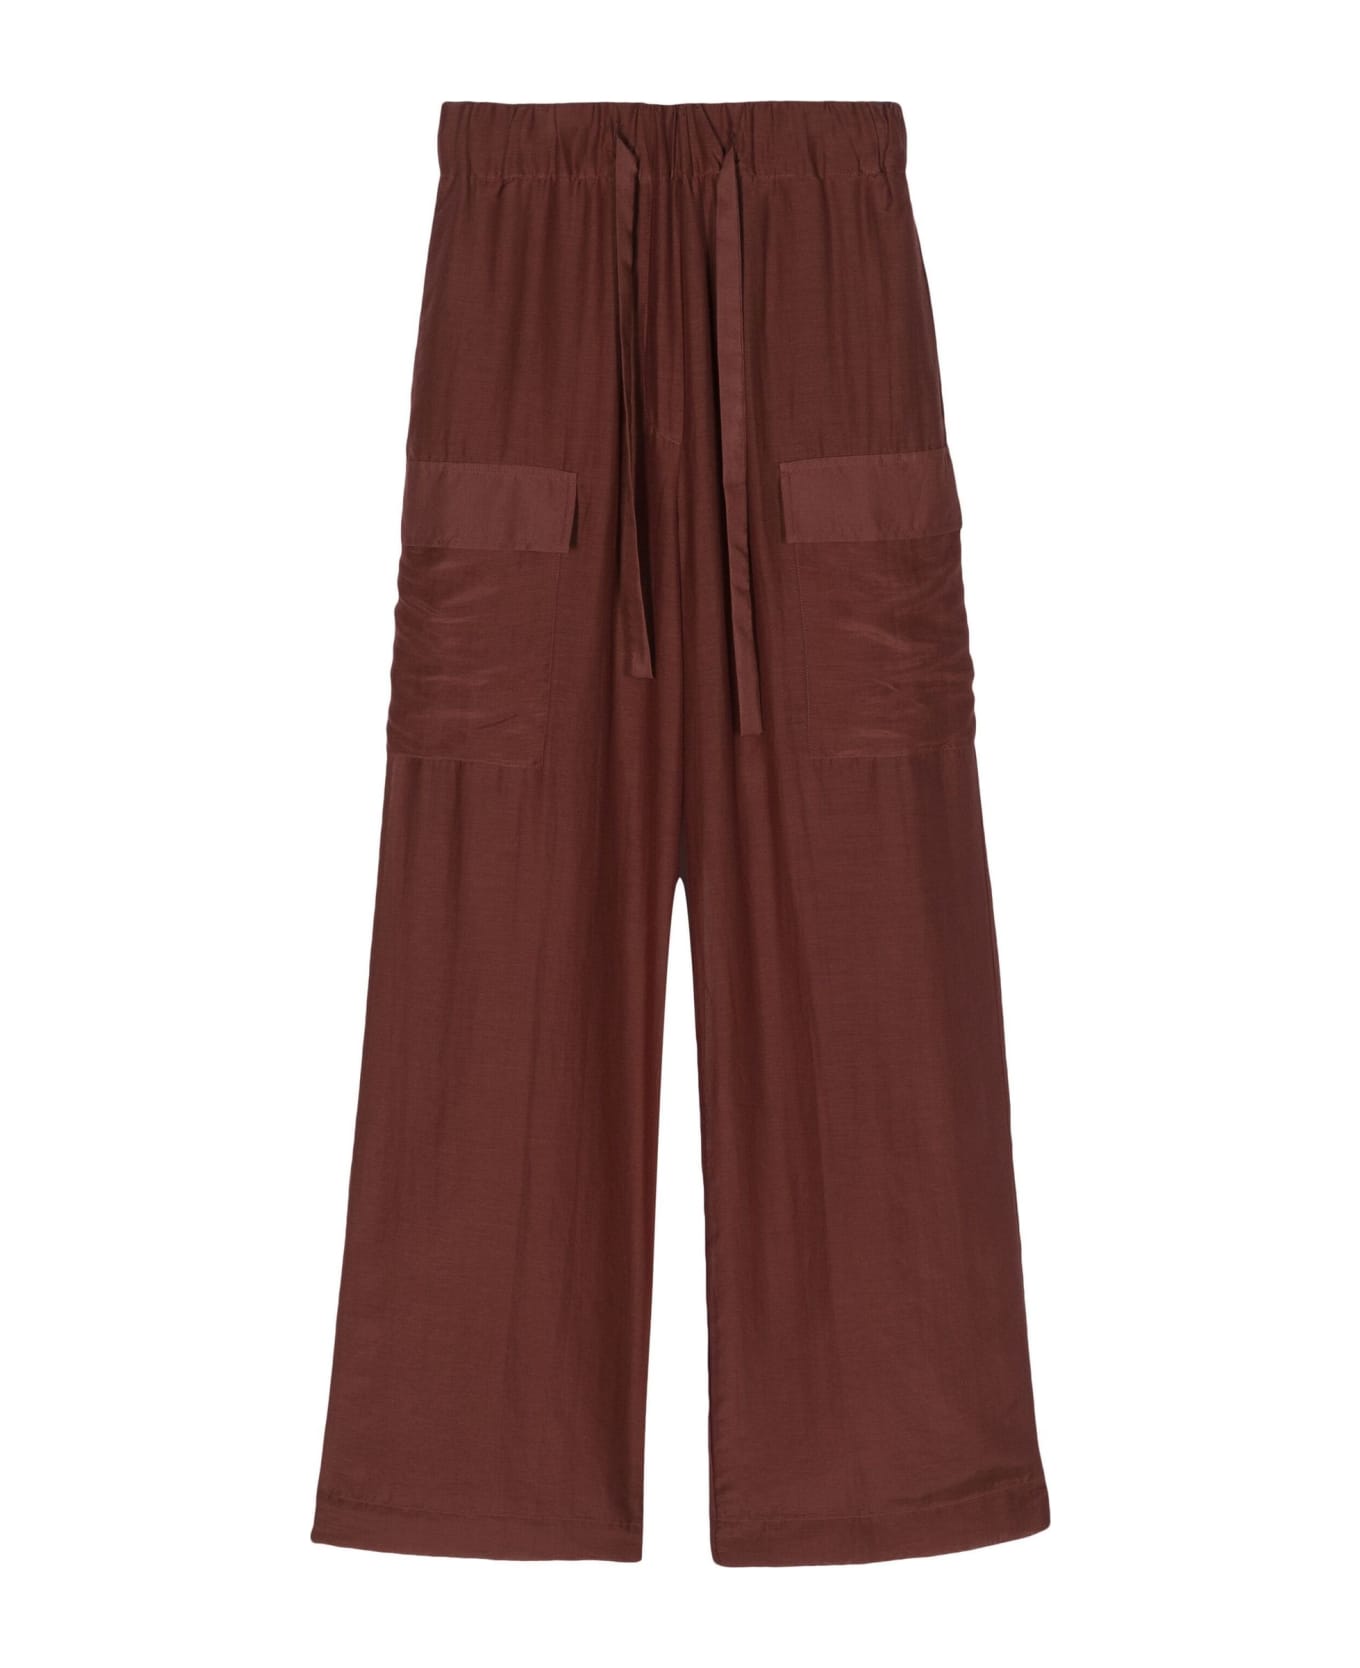 SEMICOUTURE Brown Cotton-silk Blend Trousers - Brown